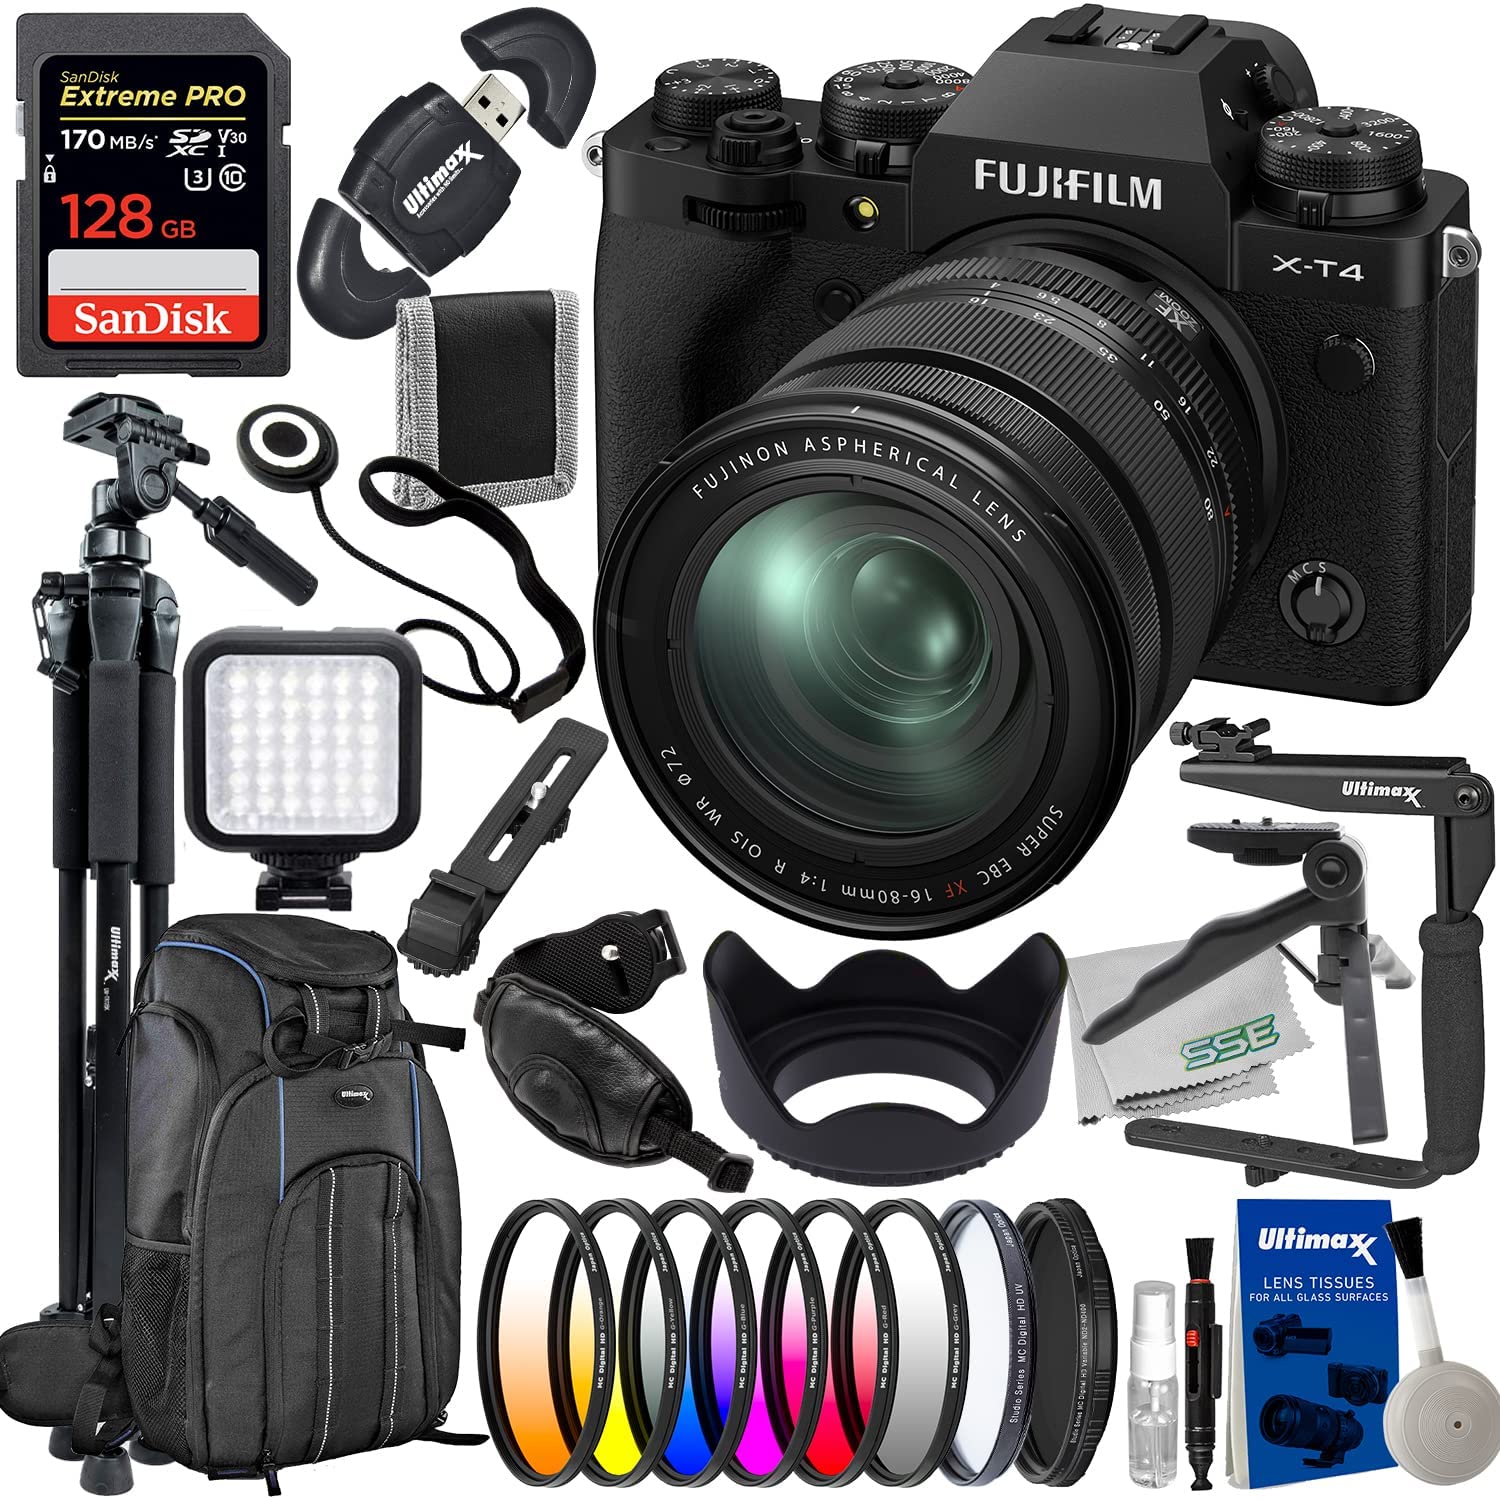 FUJIFILM X-T4 Mirrorless Camera with 16-80mm Lens (Black) + SanDisk 128GB Extreme Pro SDXC, Deluxe Camera Backpack, Lightweight 72” Tripod, LED Video Light & Much More (36pc Bundle)